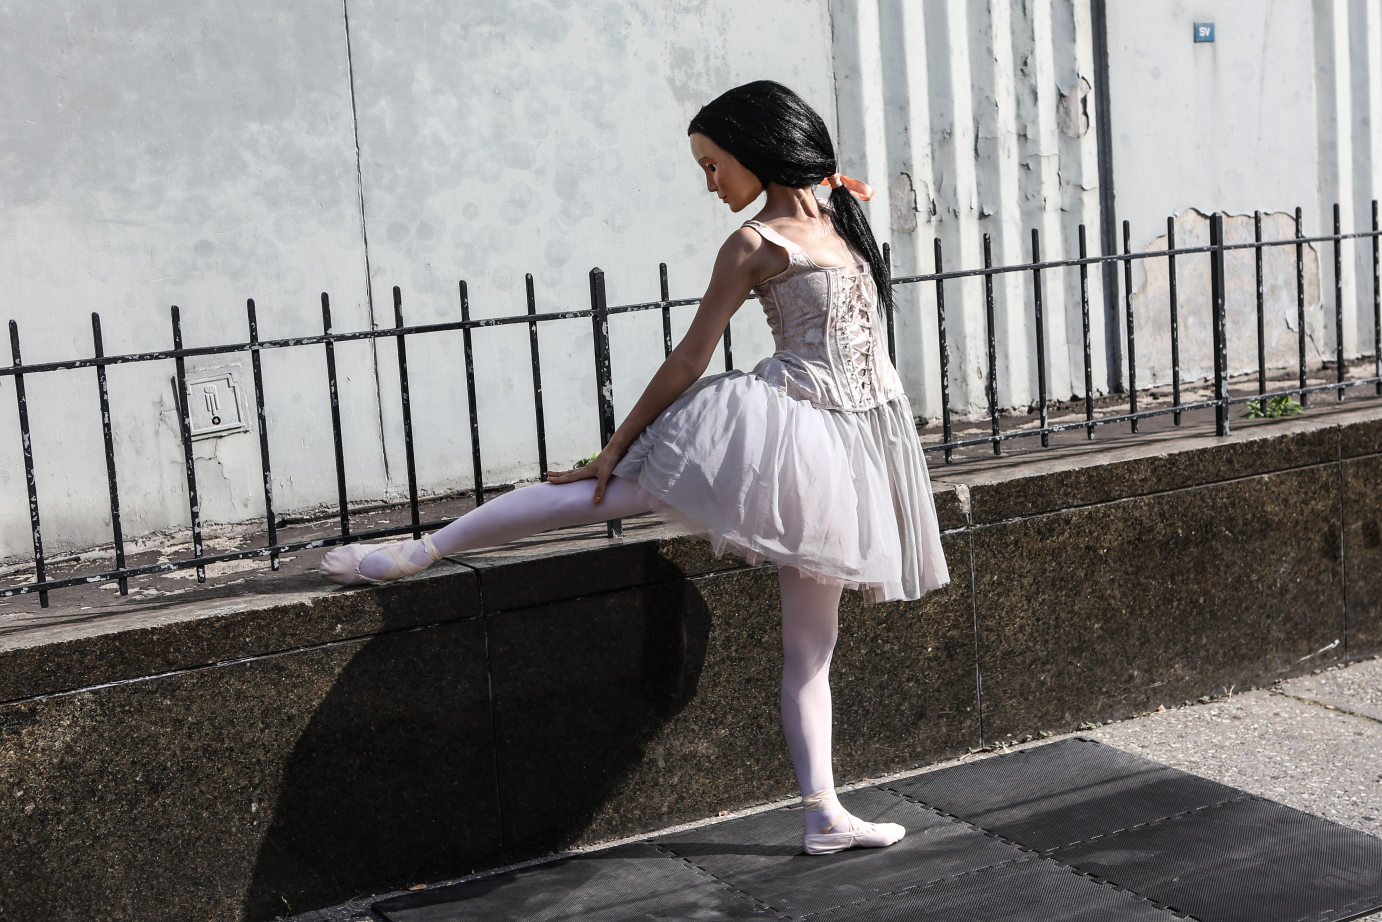 A dancer with a plastic mask and wig evokes Edgar Degas' Little Dancer. She lifts a ballet-slippered foot to rest against a wrought-iron fence.